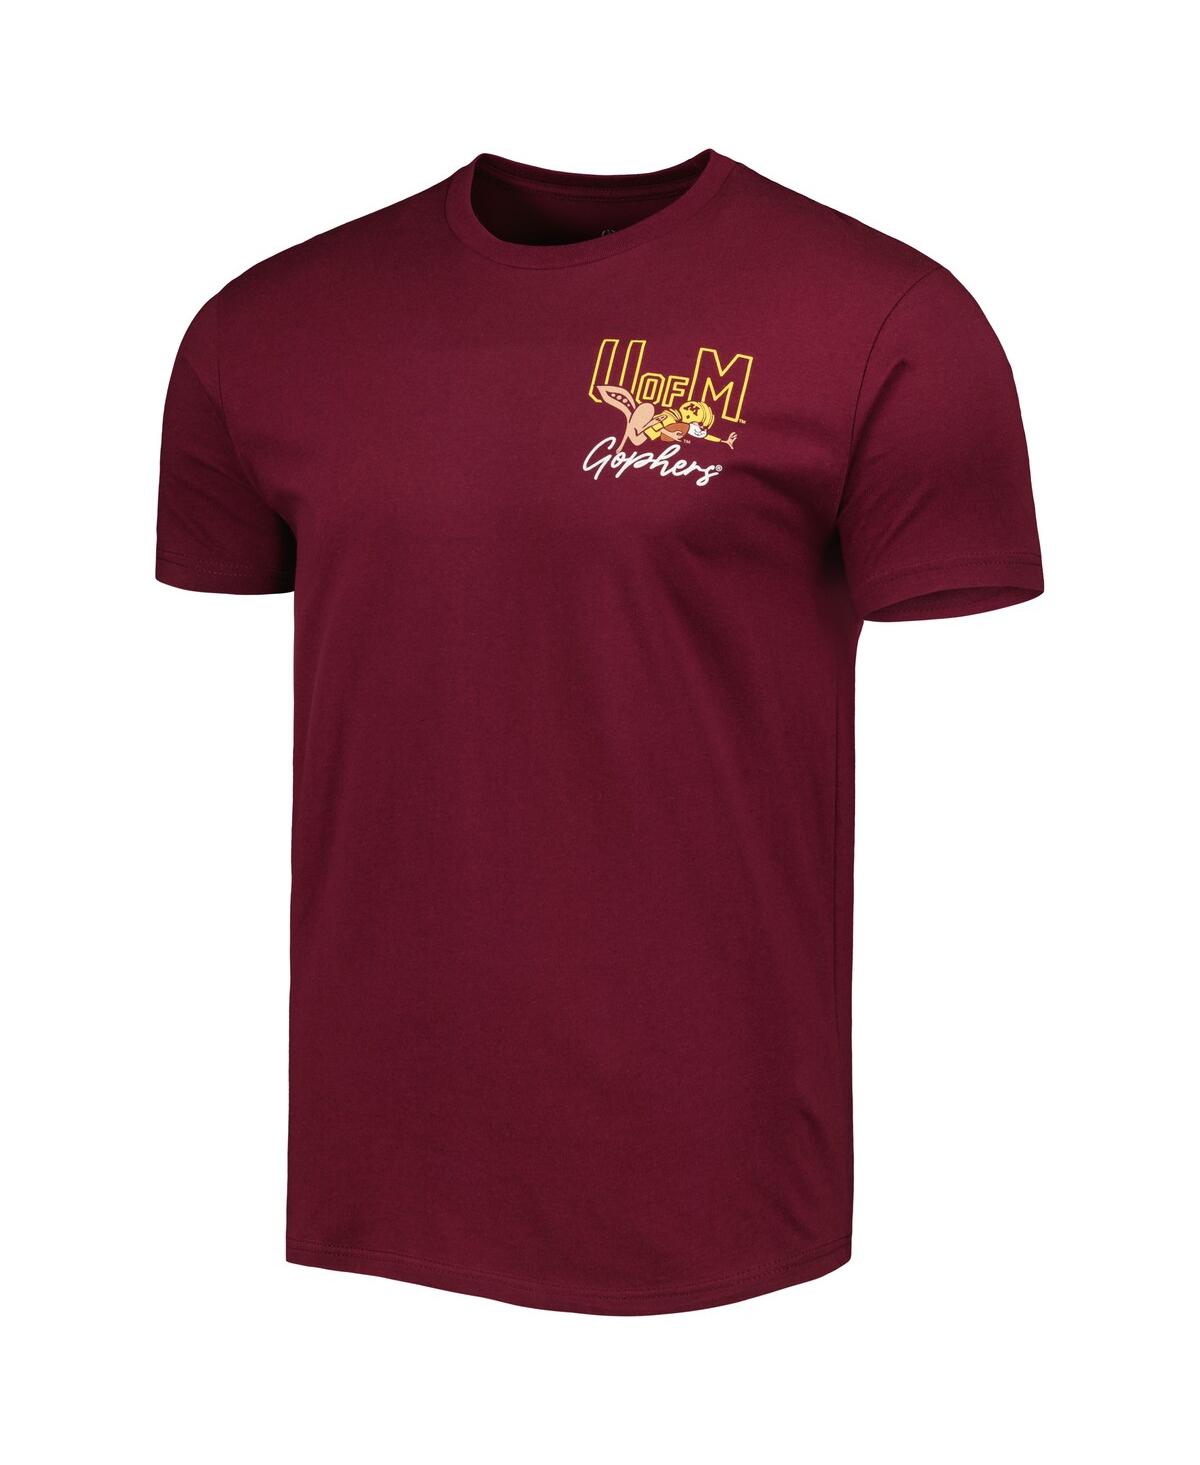 Shop Image One Men's Maroon Minnesota Golden Gophers Vintage-like Through The Years Two-hit T-shirt